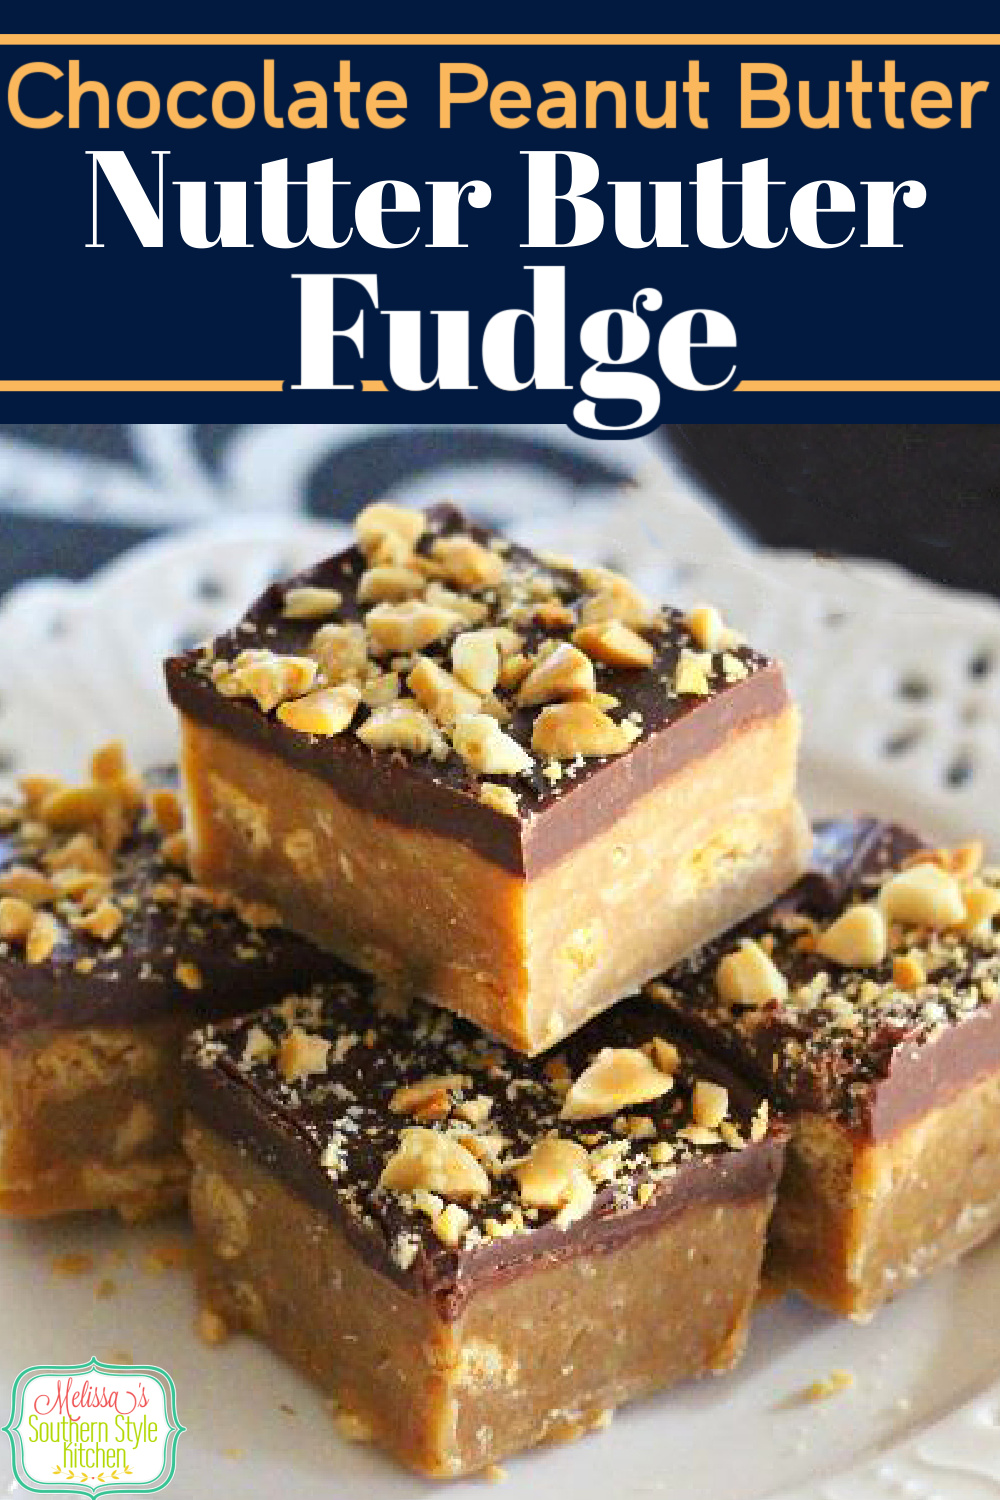 No candy thermometer is required to make this Chocolate Peanut Butter Nutter Butter Fudge #peanutbutterfudge #fudgerecipes #sweet #desserts #dessertfoodrecipes #peanutbutter #peanuts #southernrecipes #southernfood #melissassouthernstylekitchen via @melissasssk